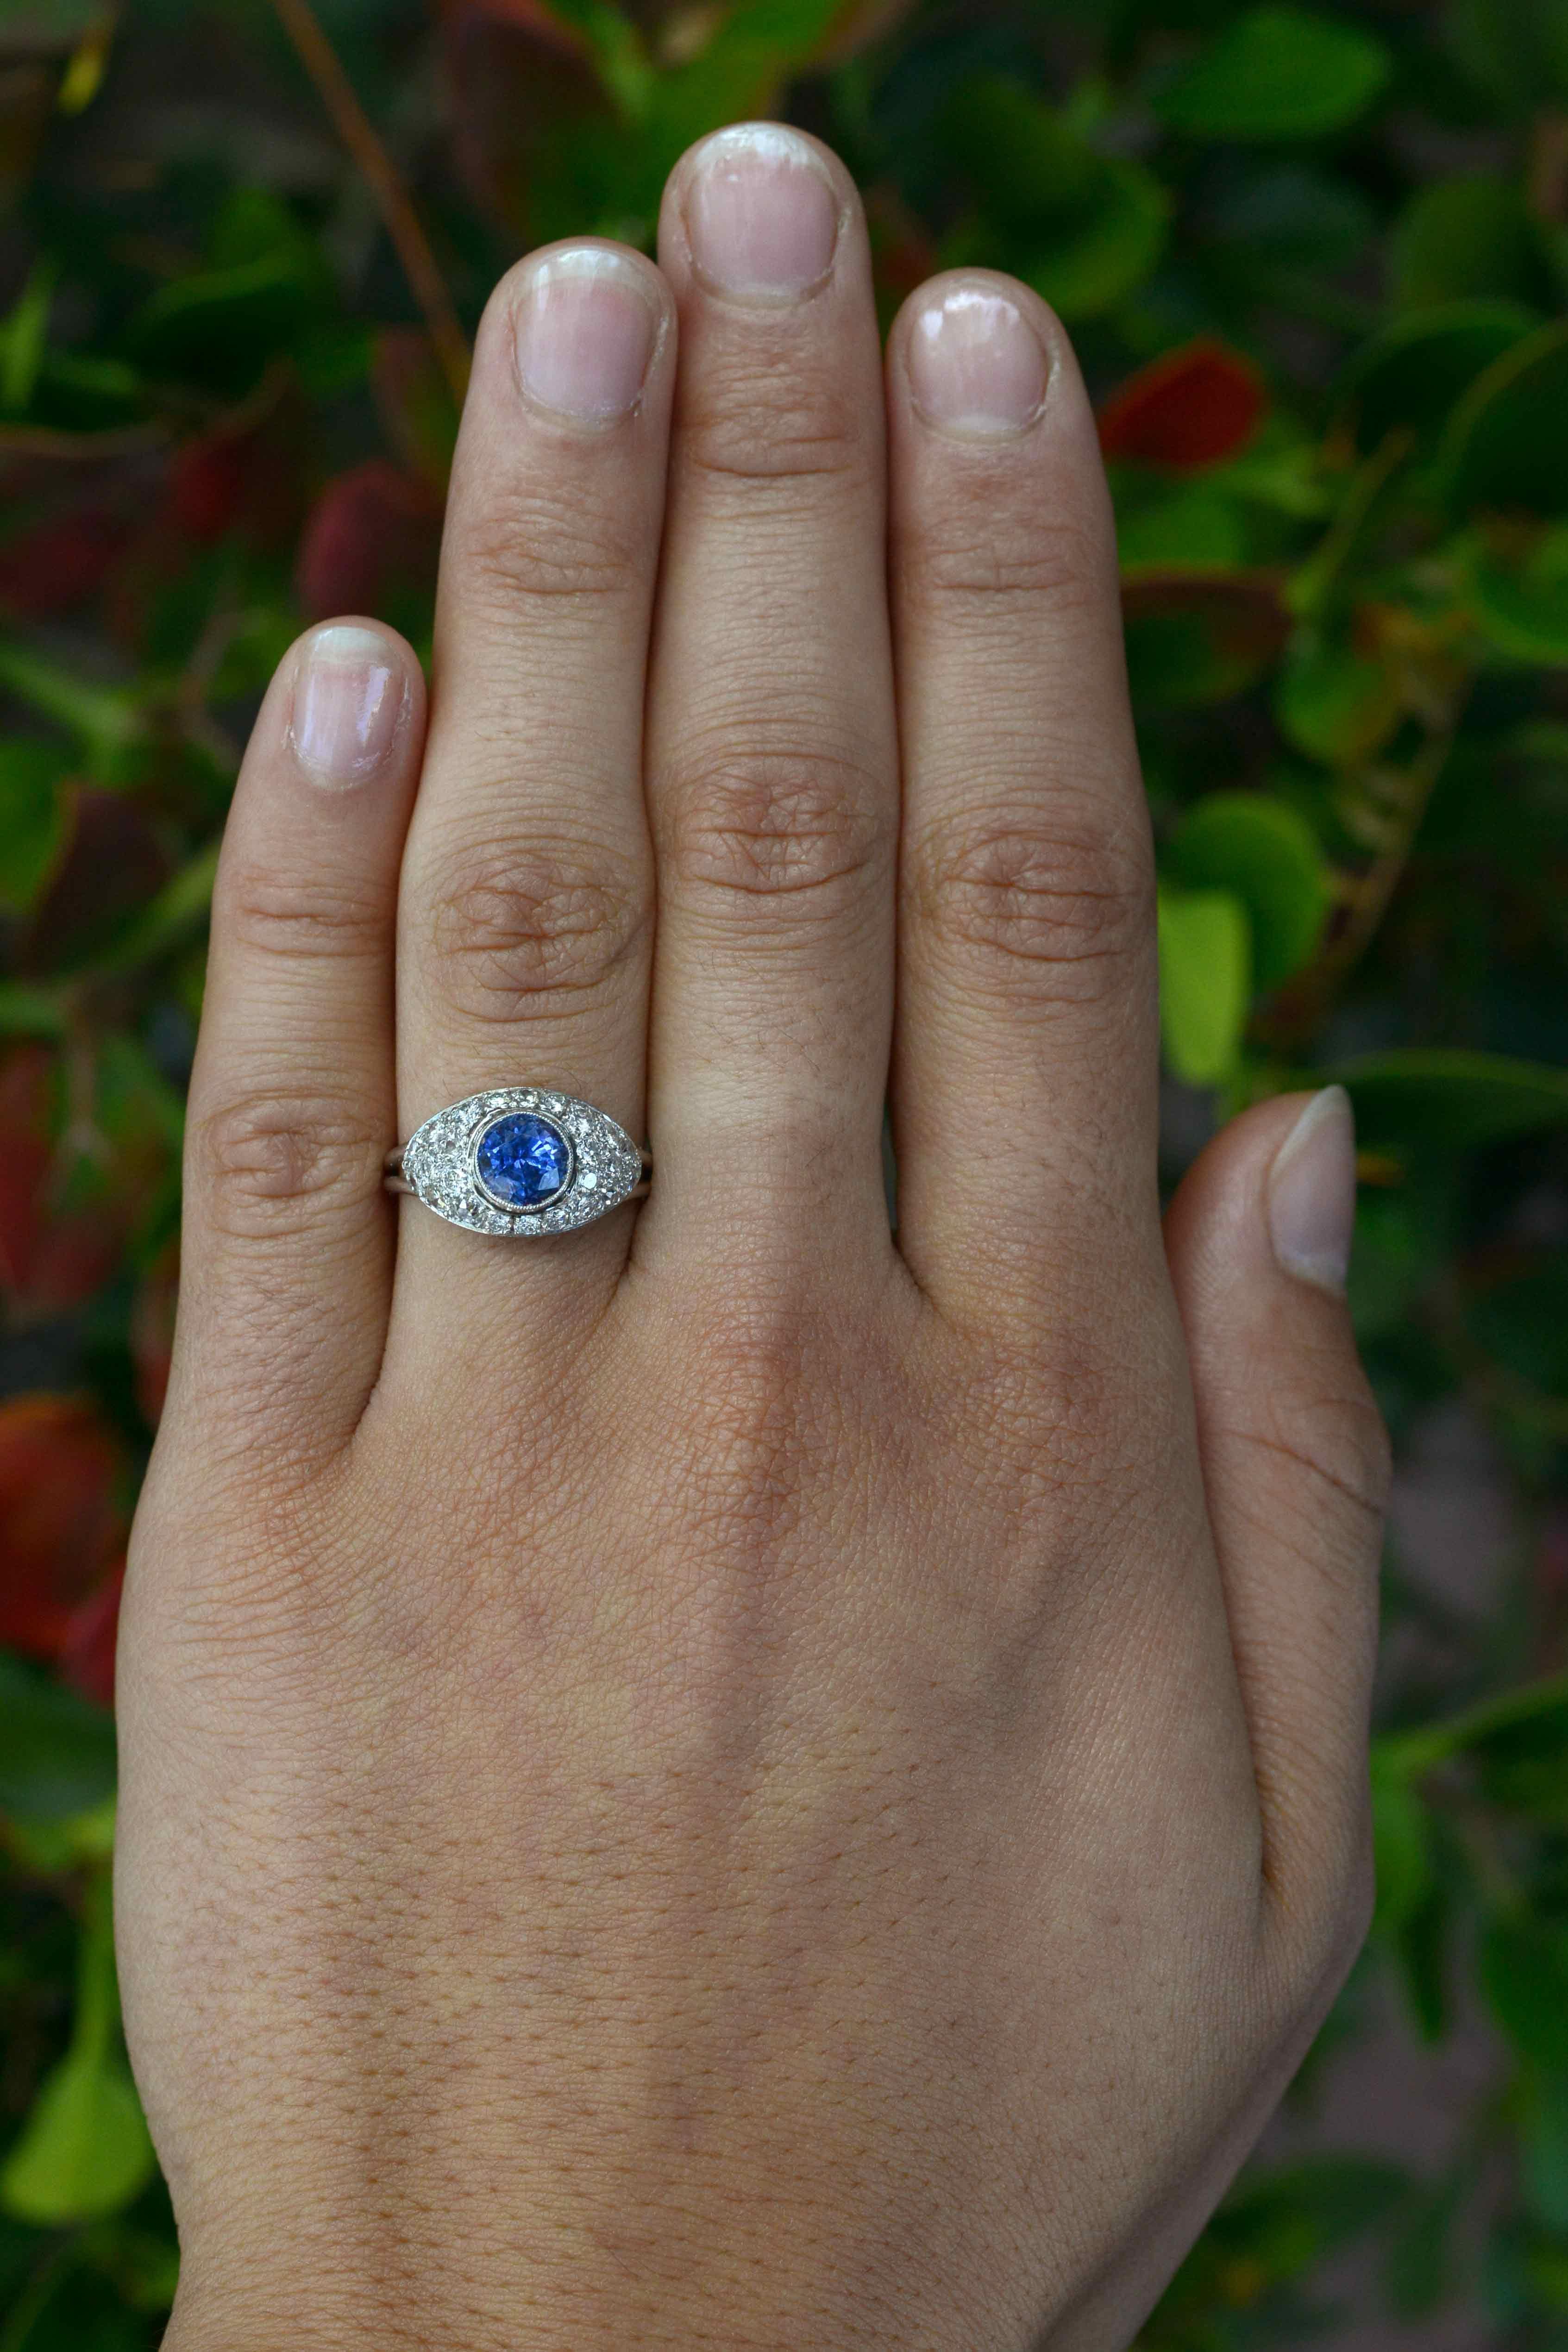 An original Art Deco style sapphire engagement ring crossing over from the Edwardian era, the platinum bombe' dome setting is encrusted with 3/4 carats of sparkling old European diamonds. Topped with the most vibrant, shimmering shade of blue with